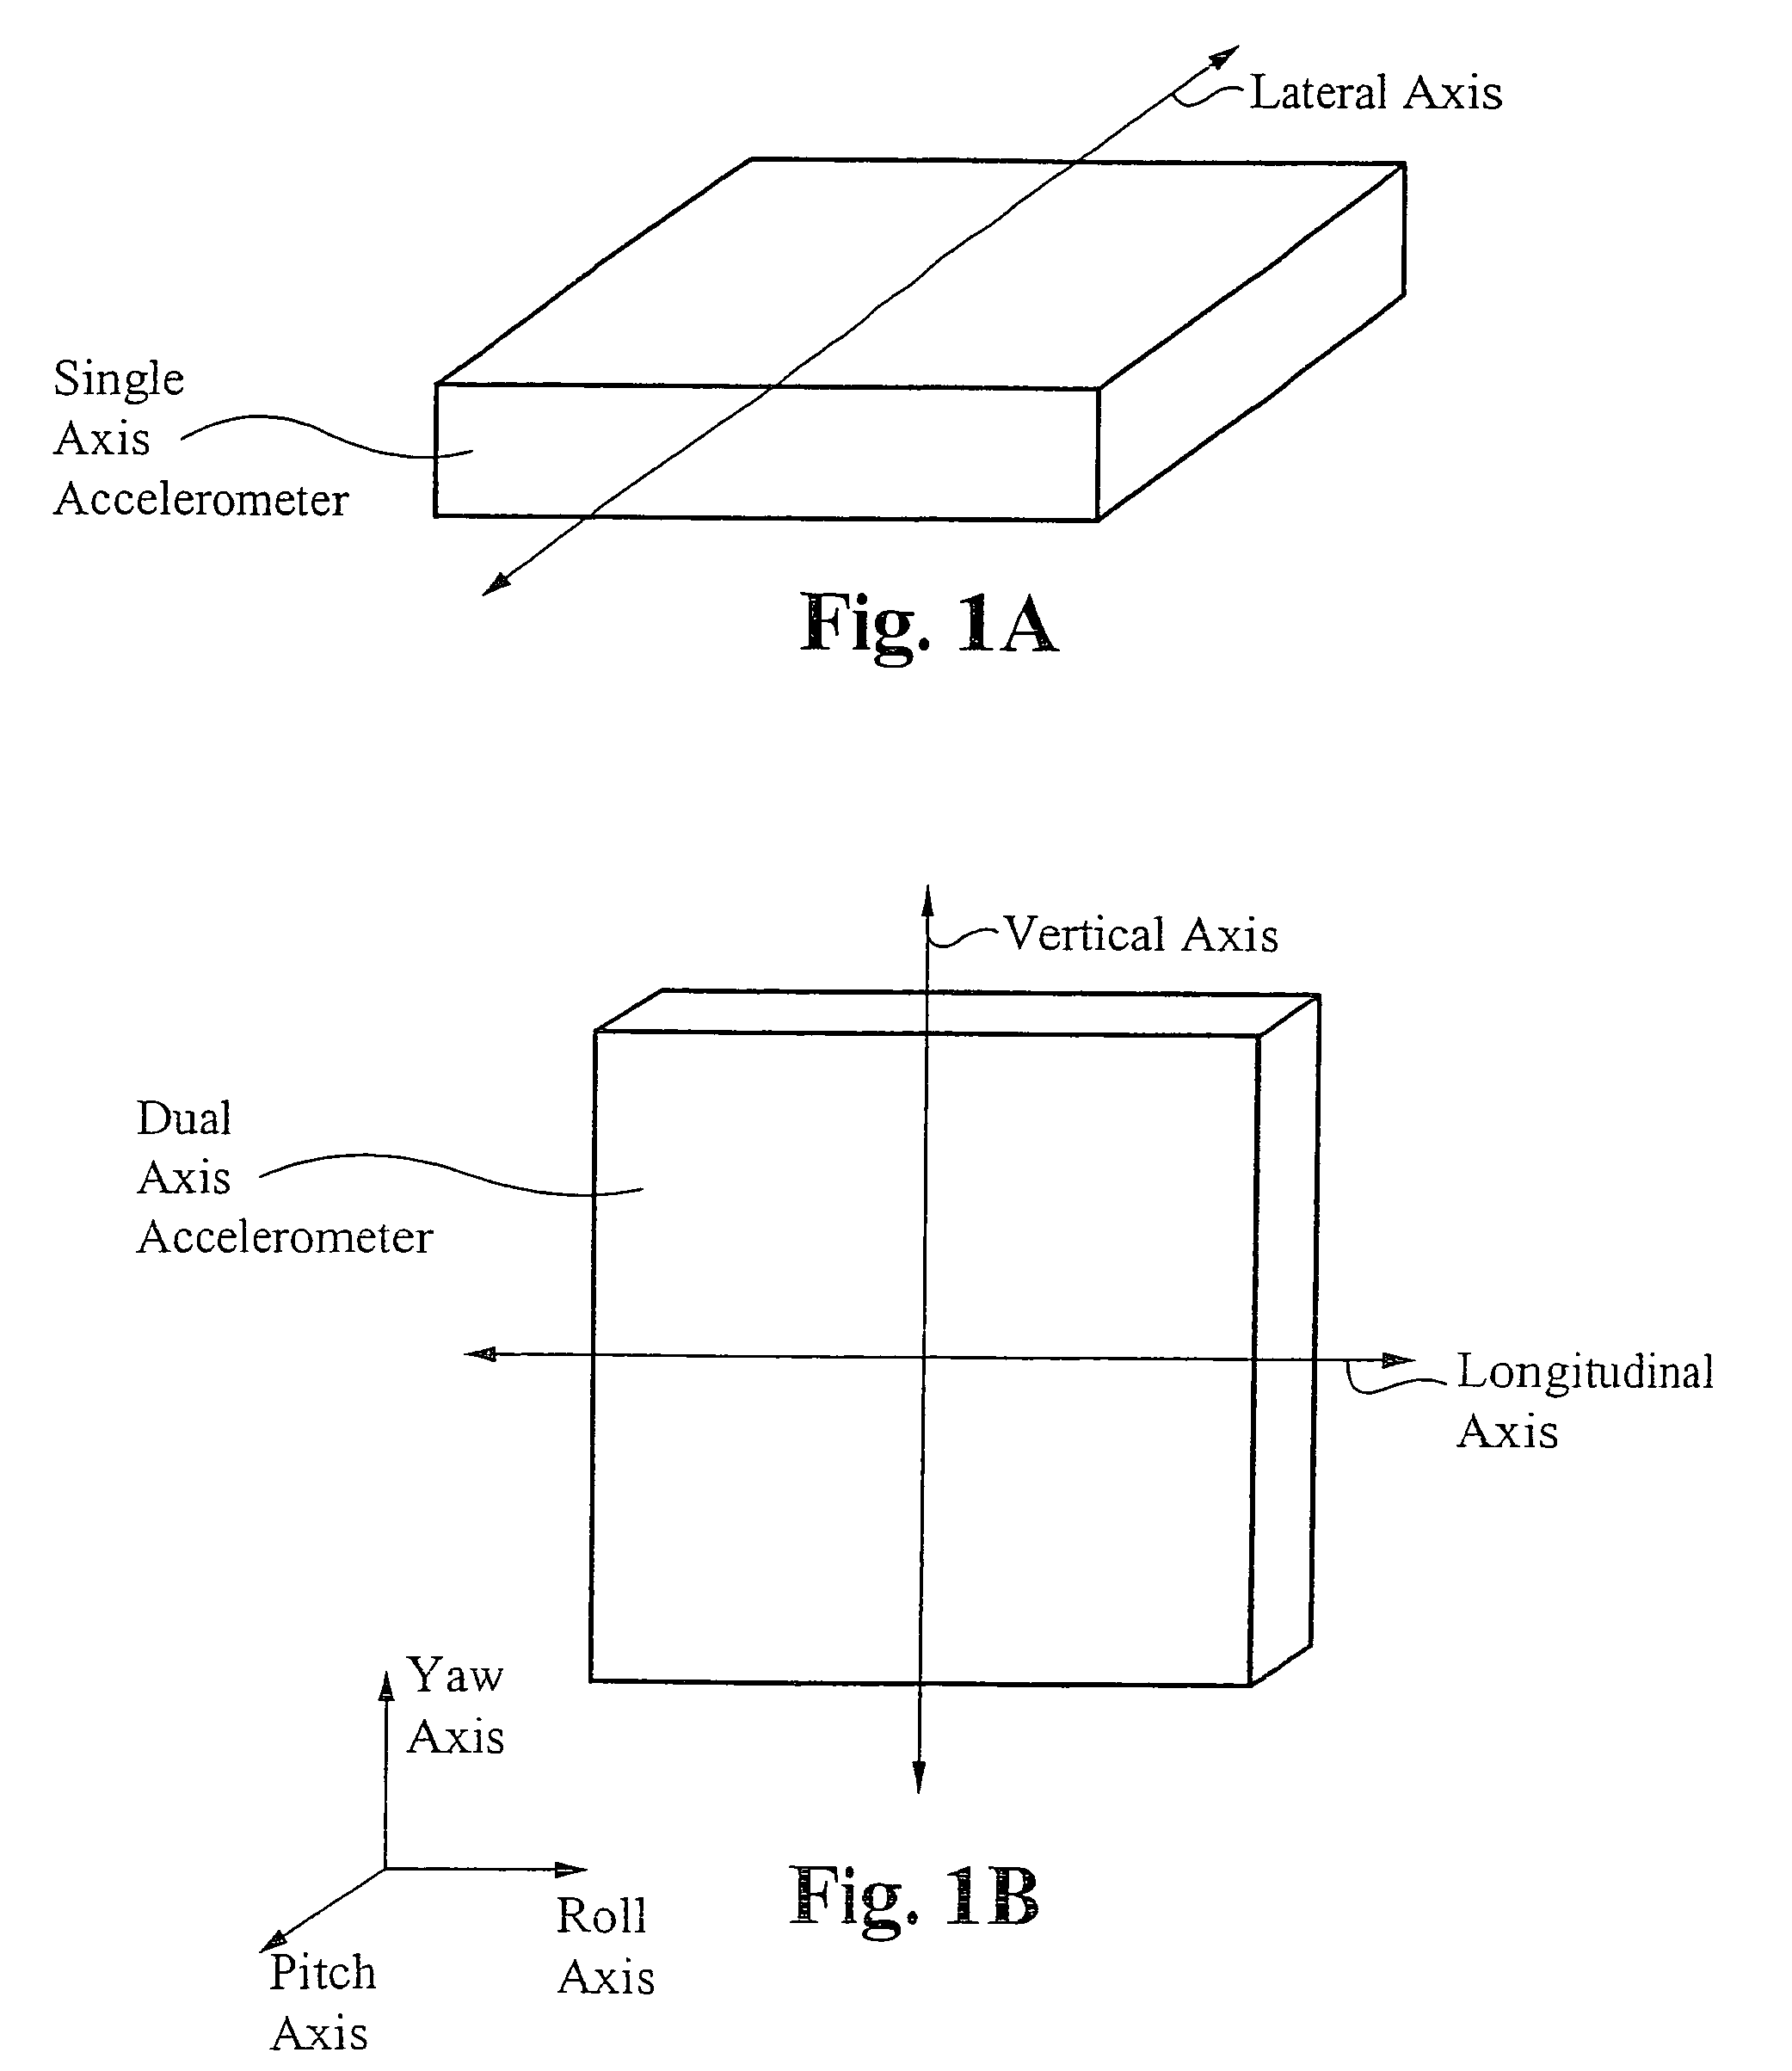 Absolute acceleration sensor for use within moving vehicles